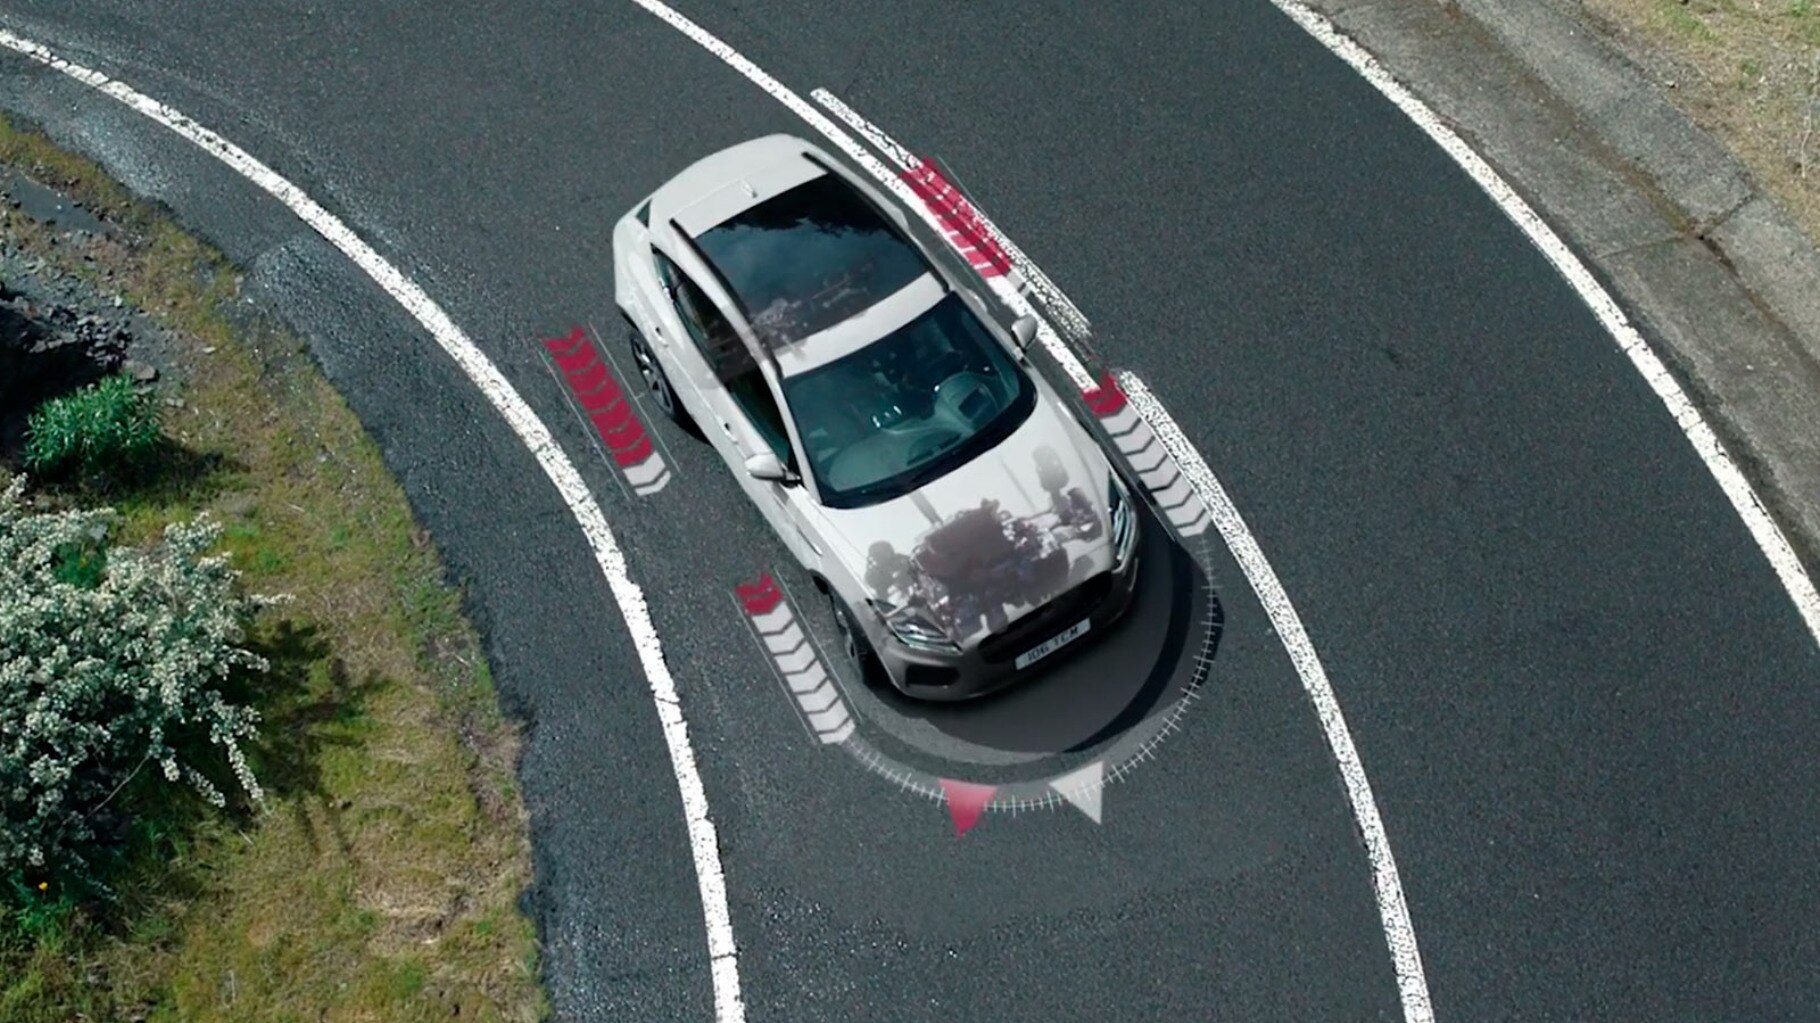 Transparent view of Jaguar E-Pace showing the way the active driveline operates.